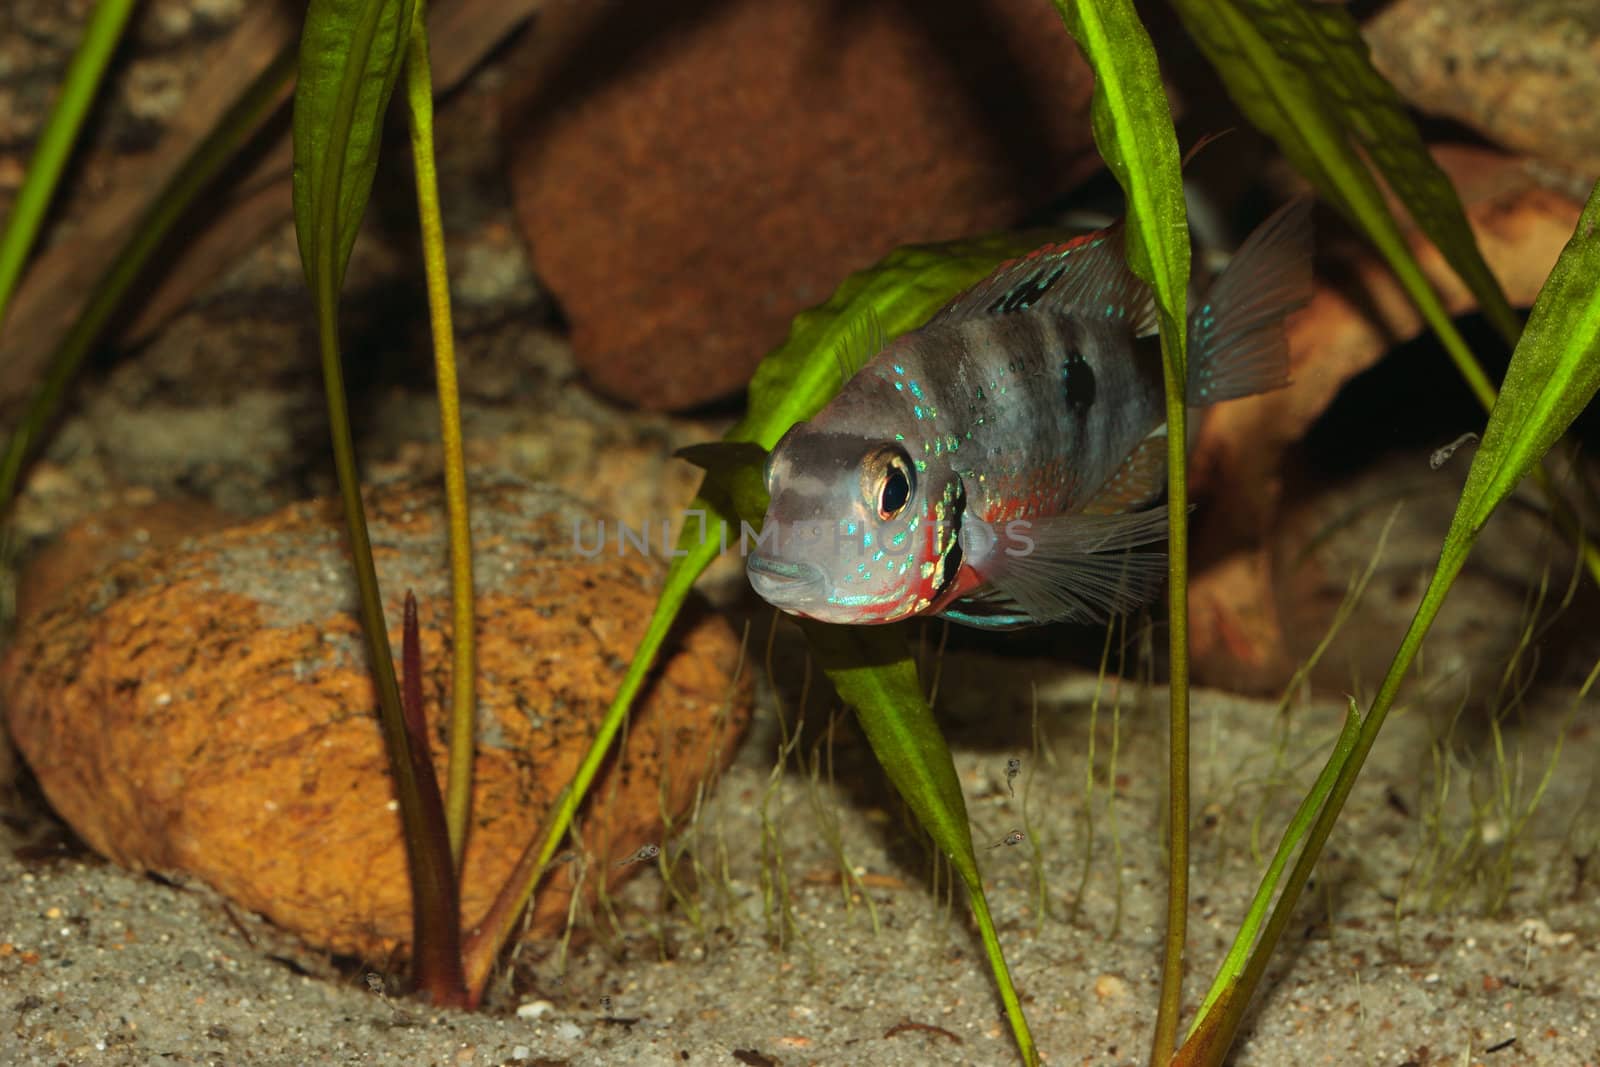 Mexican Fire Mouth (Thorichthys ellioti) - Female with a small flock of juvenile fish